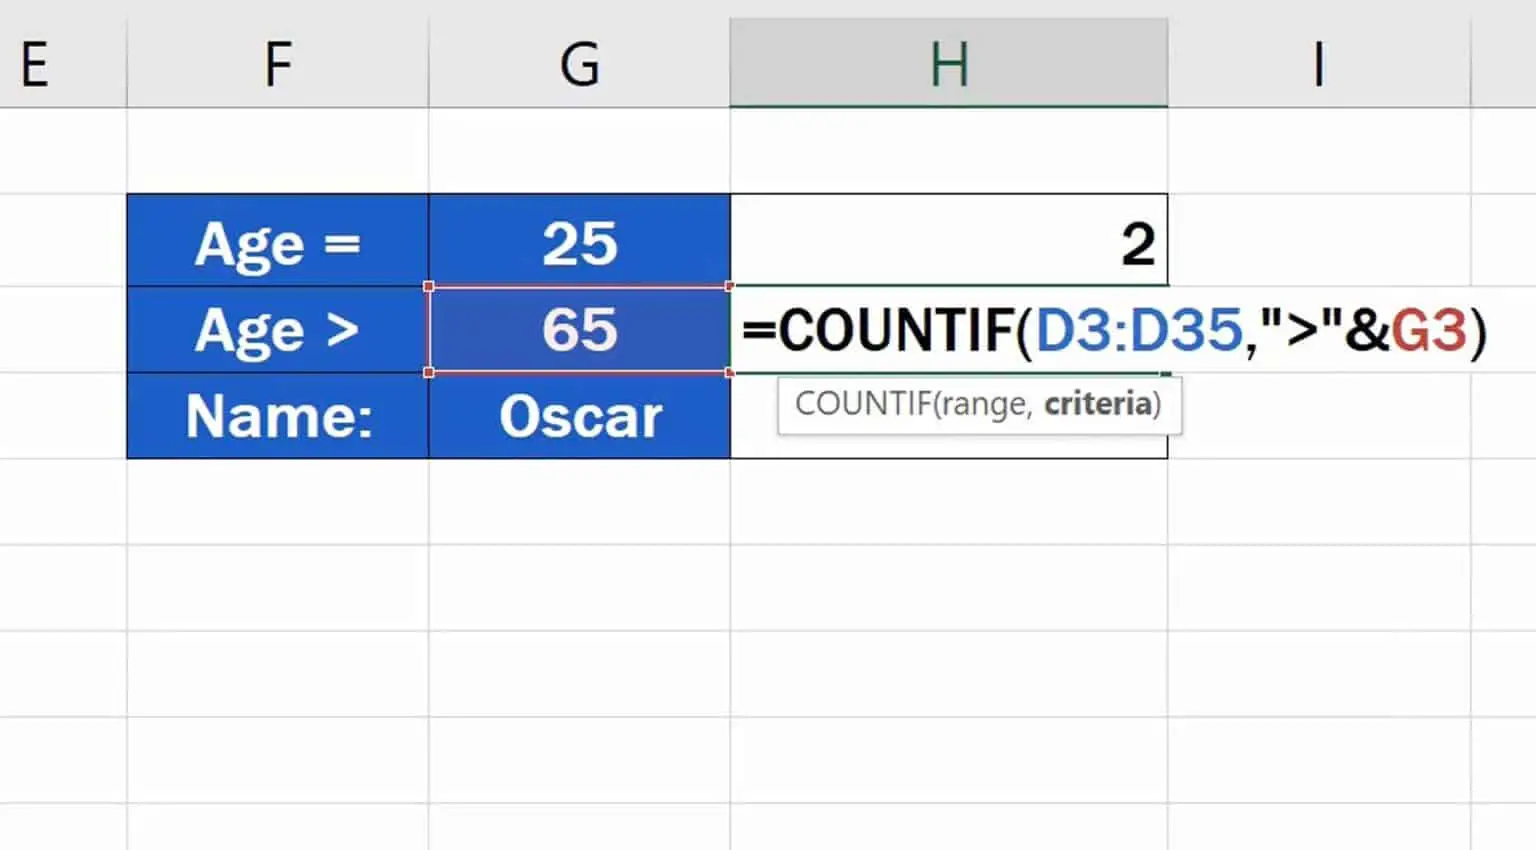 What function is used to return a value in Excel?